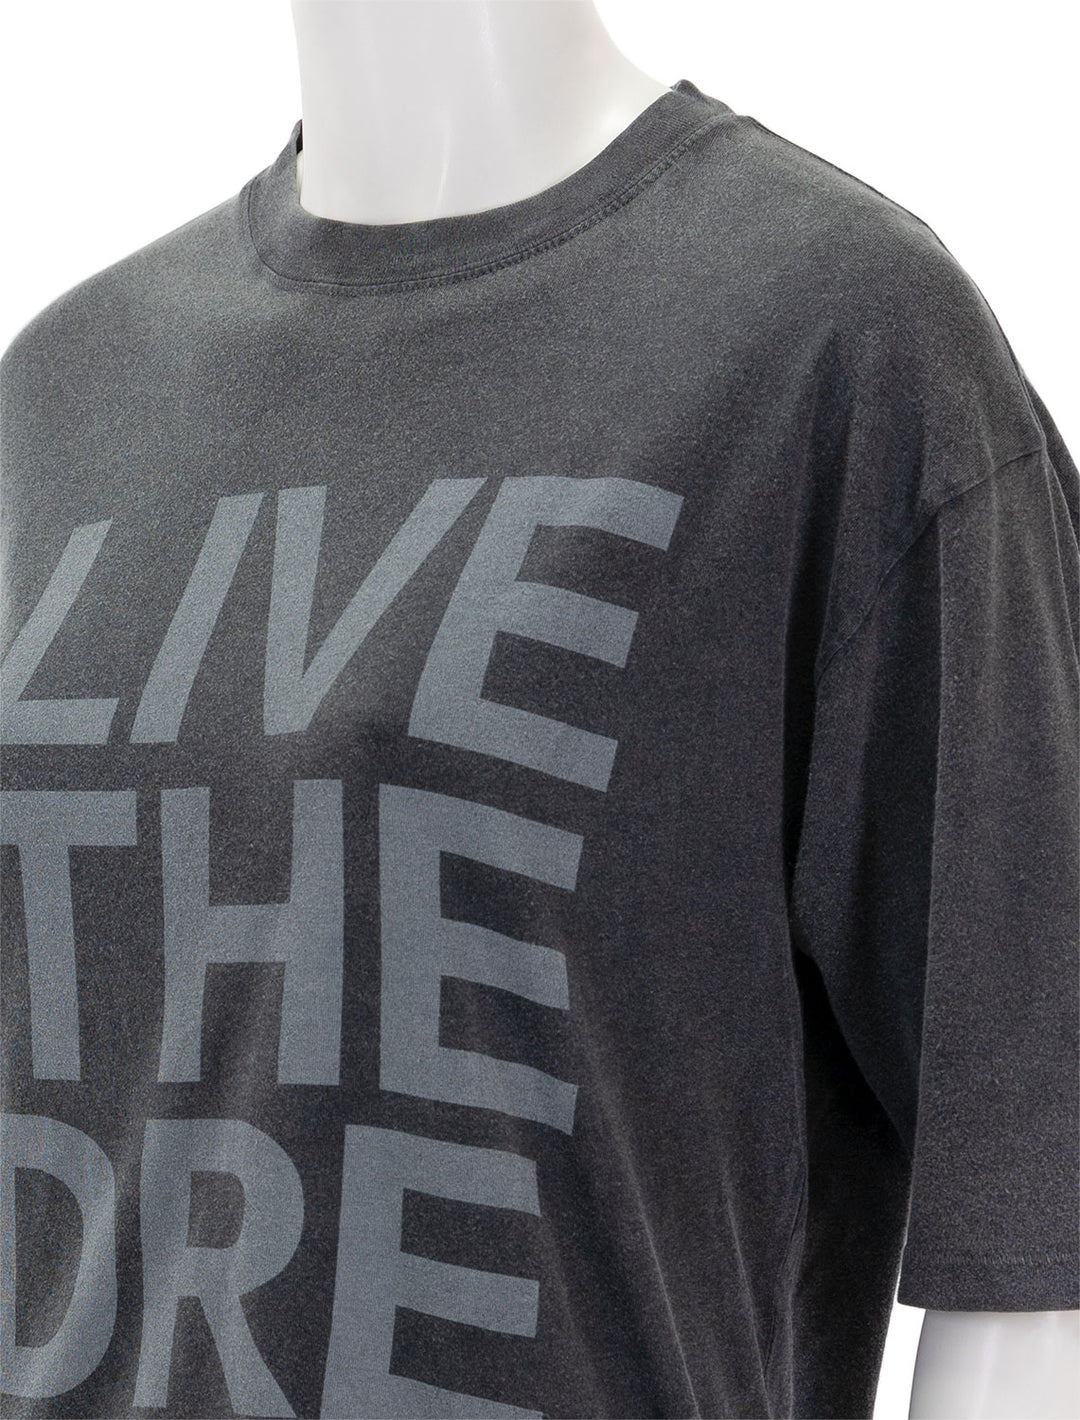 Close-up view of Anine Bing's cason tee live the dream.